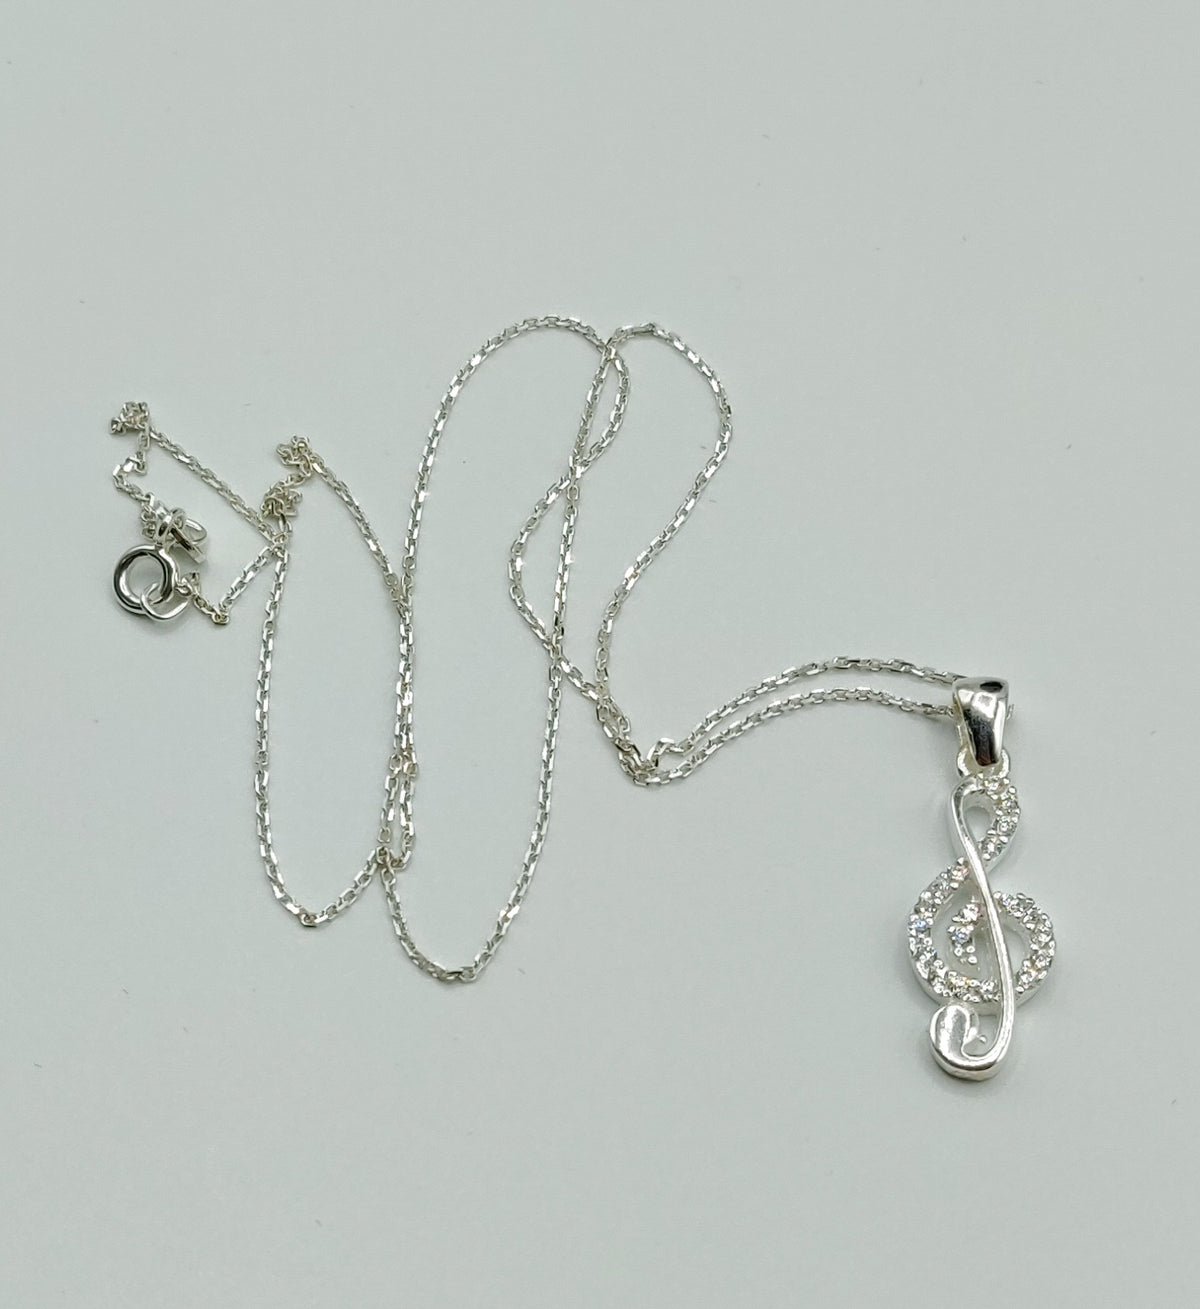 Treble clef silver necklace – sterling silver 925